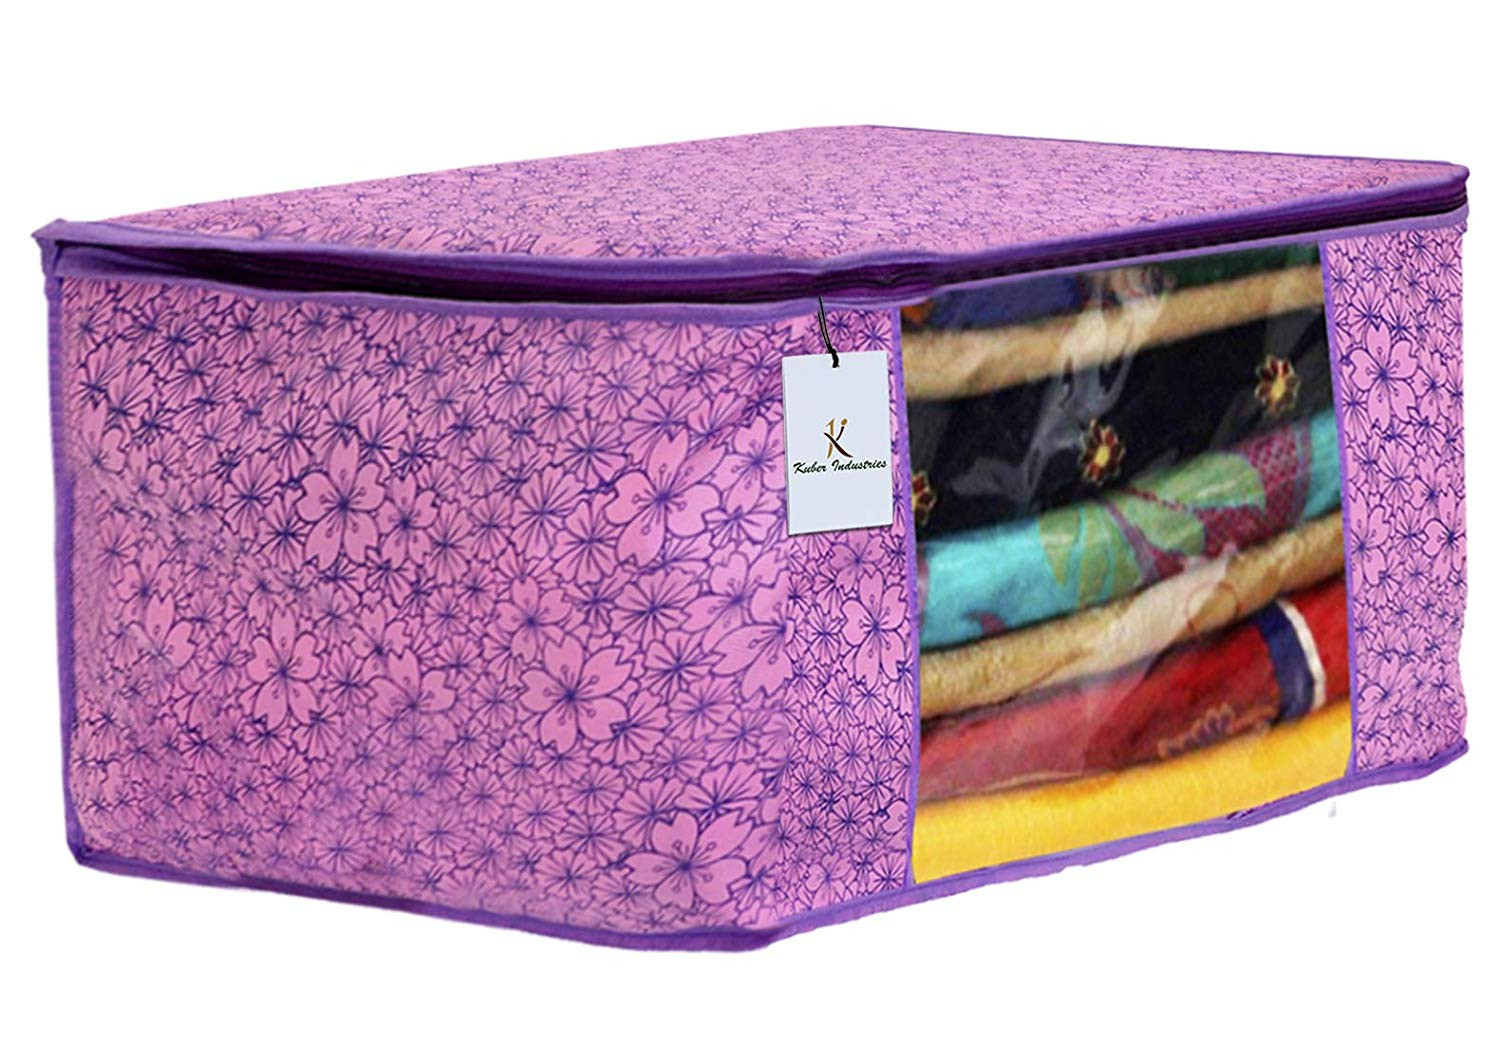 Kuber Industries Metalic Printed Non Woven Fabric Saree Cover Set with Transparent Window, Extra Large, Red & Beige & Pink Purple & Brown -CTKTC40841